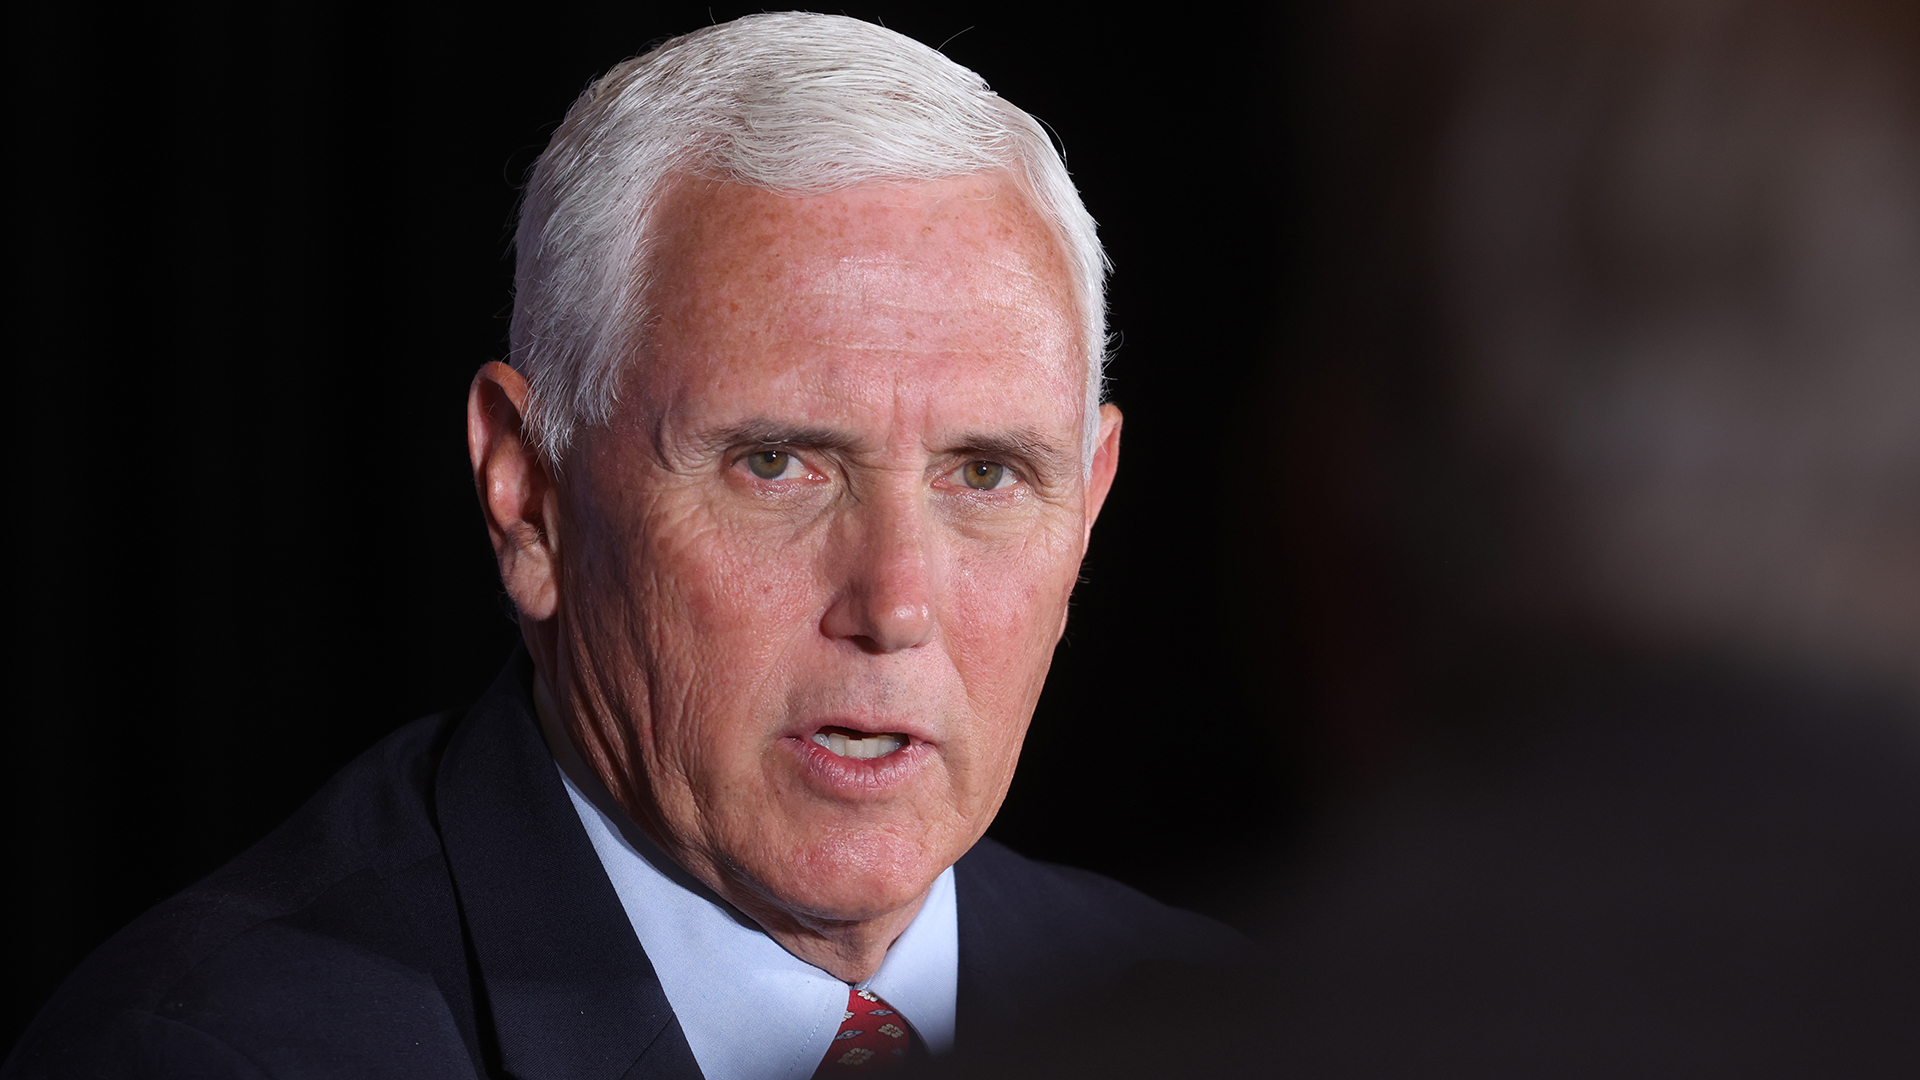 SOON: Former Vice President Mike Pence joins CNN’s Wolf Blitzer in one-on-one conversation